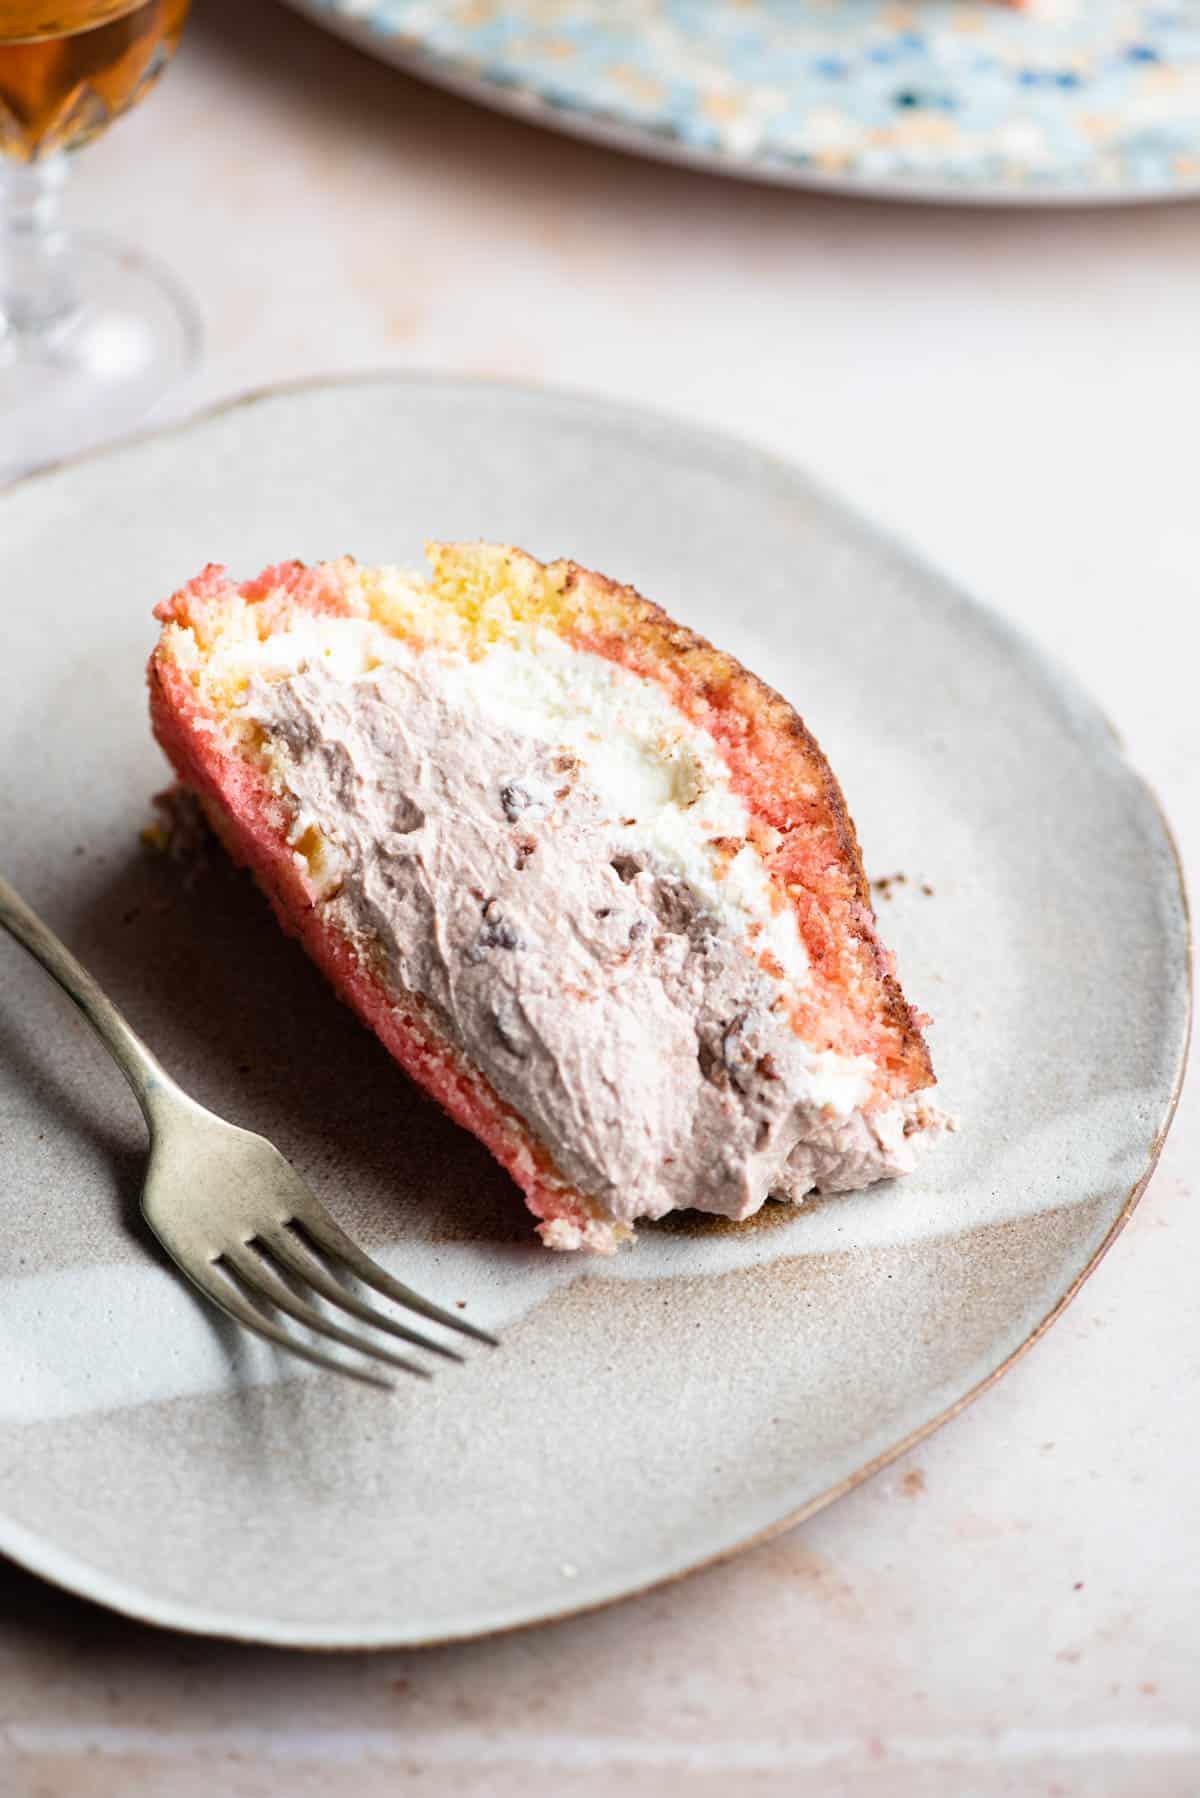 A slice of Italian Zuccotto cake on a plate with a fork at the side.